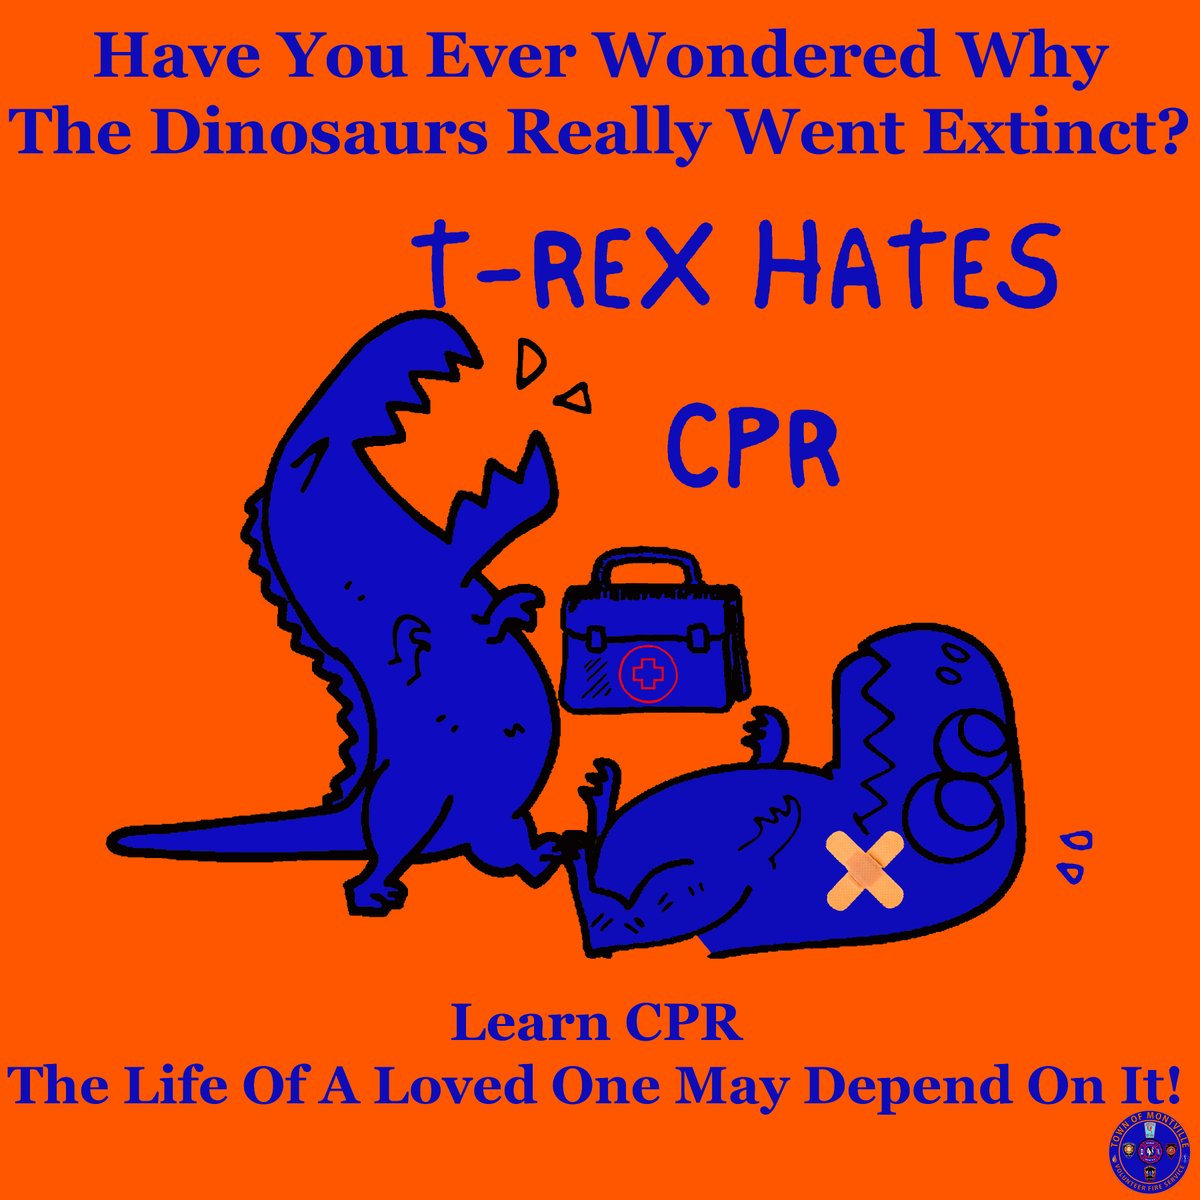 Have you ever wondered why the dinosaurs really went extinct?
Learn CPR, the life of a loved one may depend on it.

#MTVCT #Montville #MontvilleCT #CT #Connecticut #CPR @CTRedCross @CTDPH